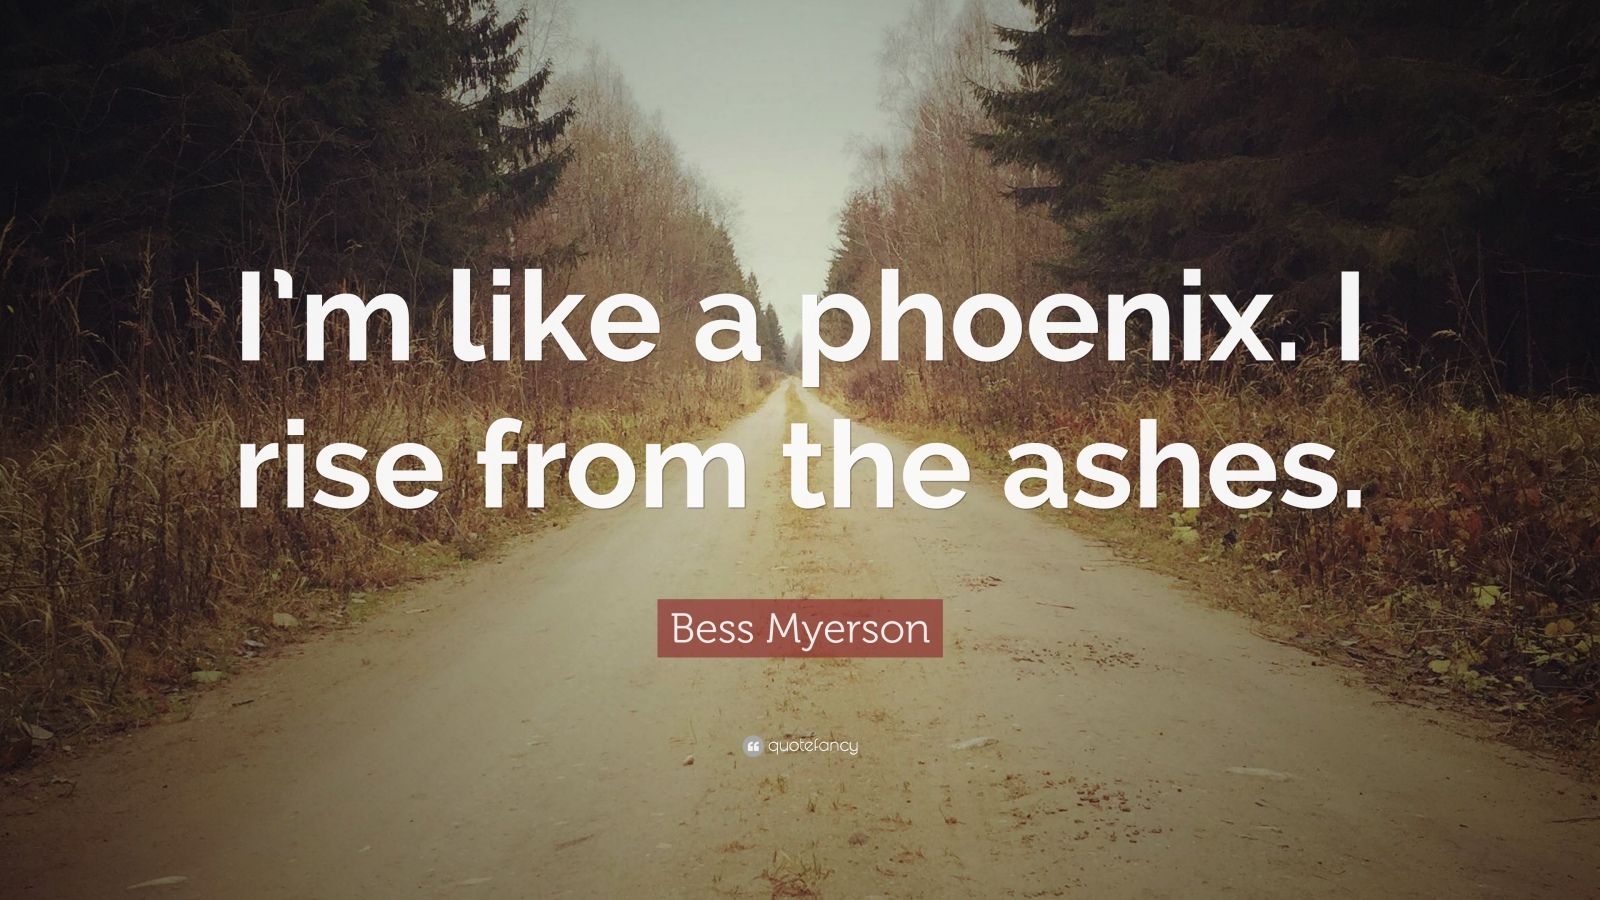 Bess Myerson Quote “I’m like a phoenix. I rise from the